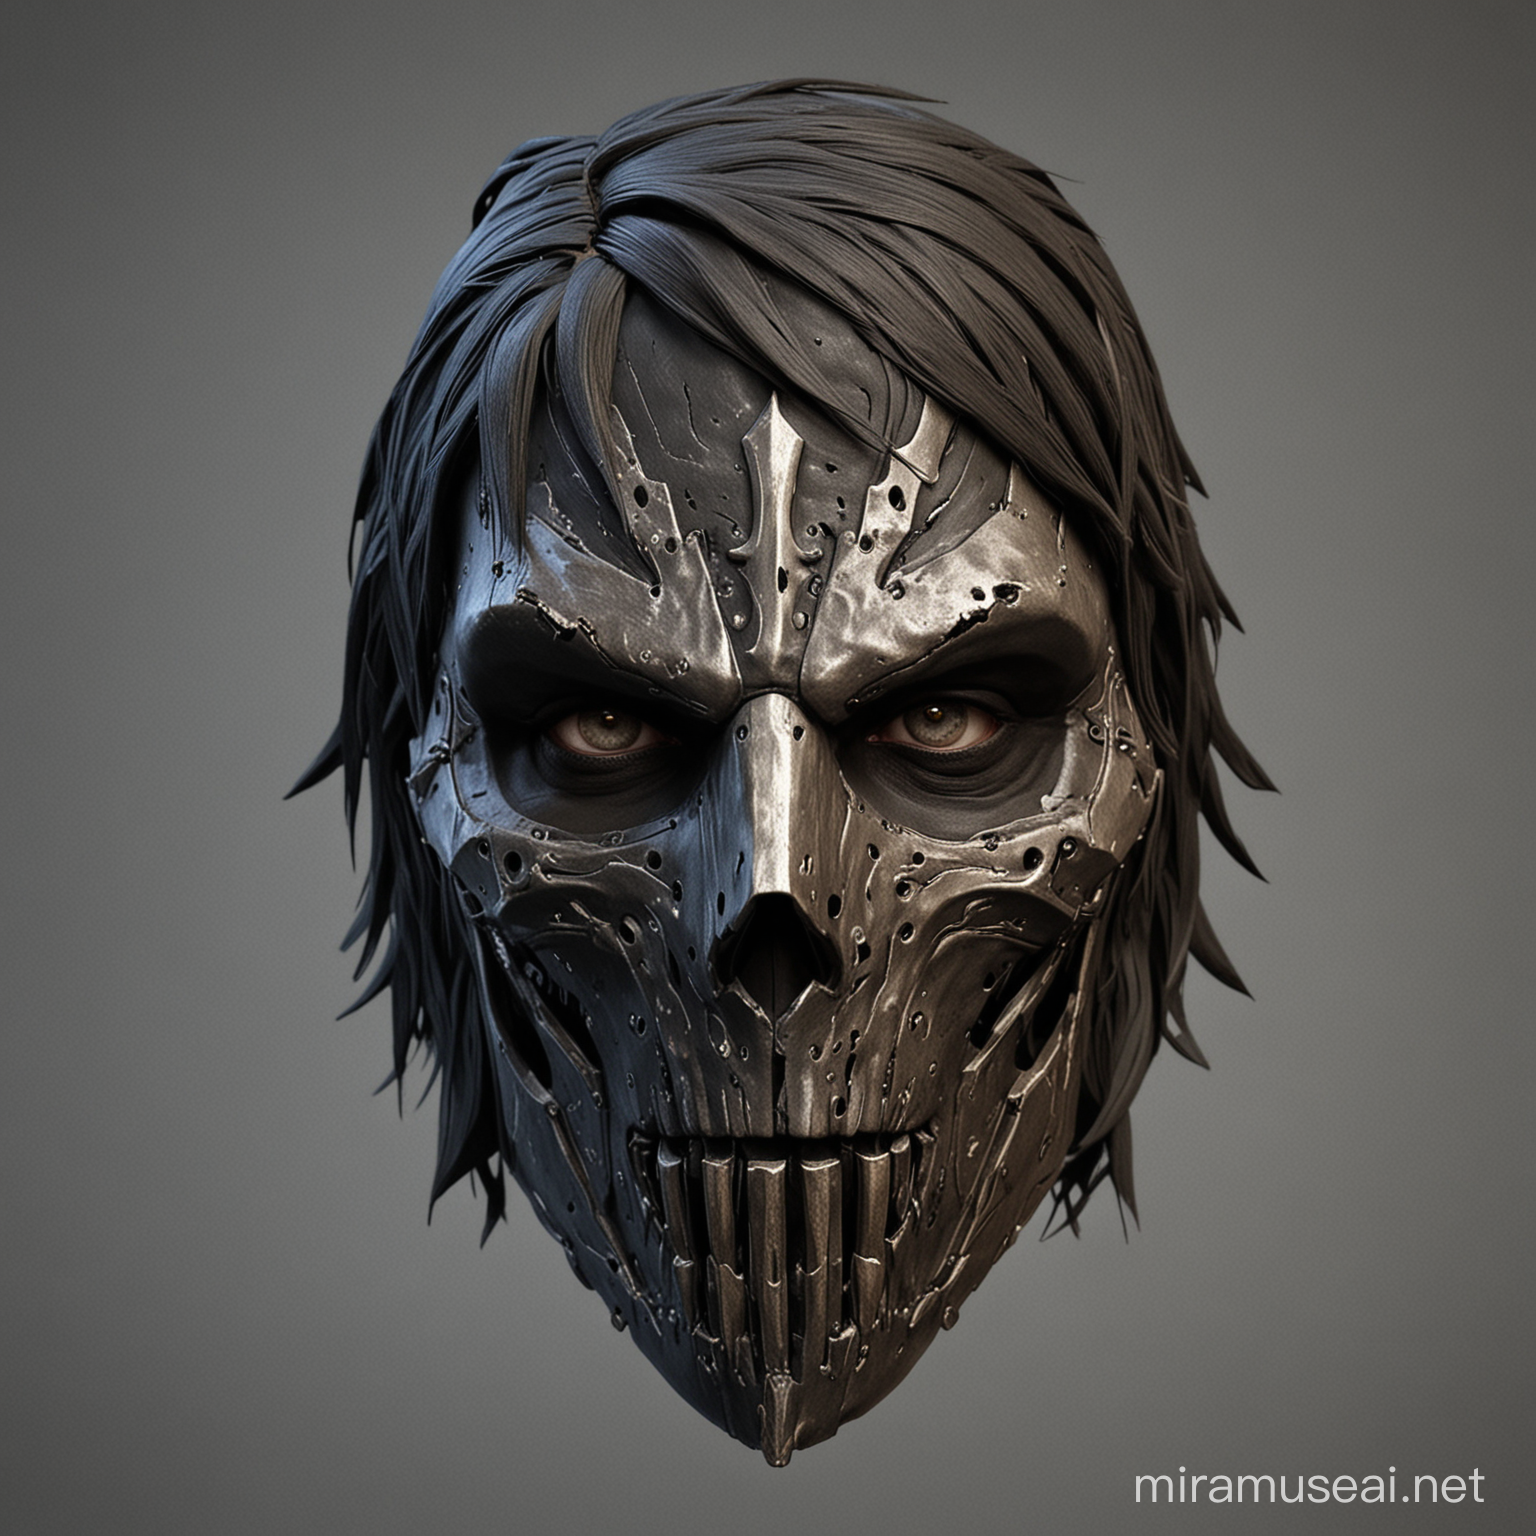 Corvo Attano Mask Exquisitely Detailed Replica of the Iconic Characters Visage